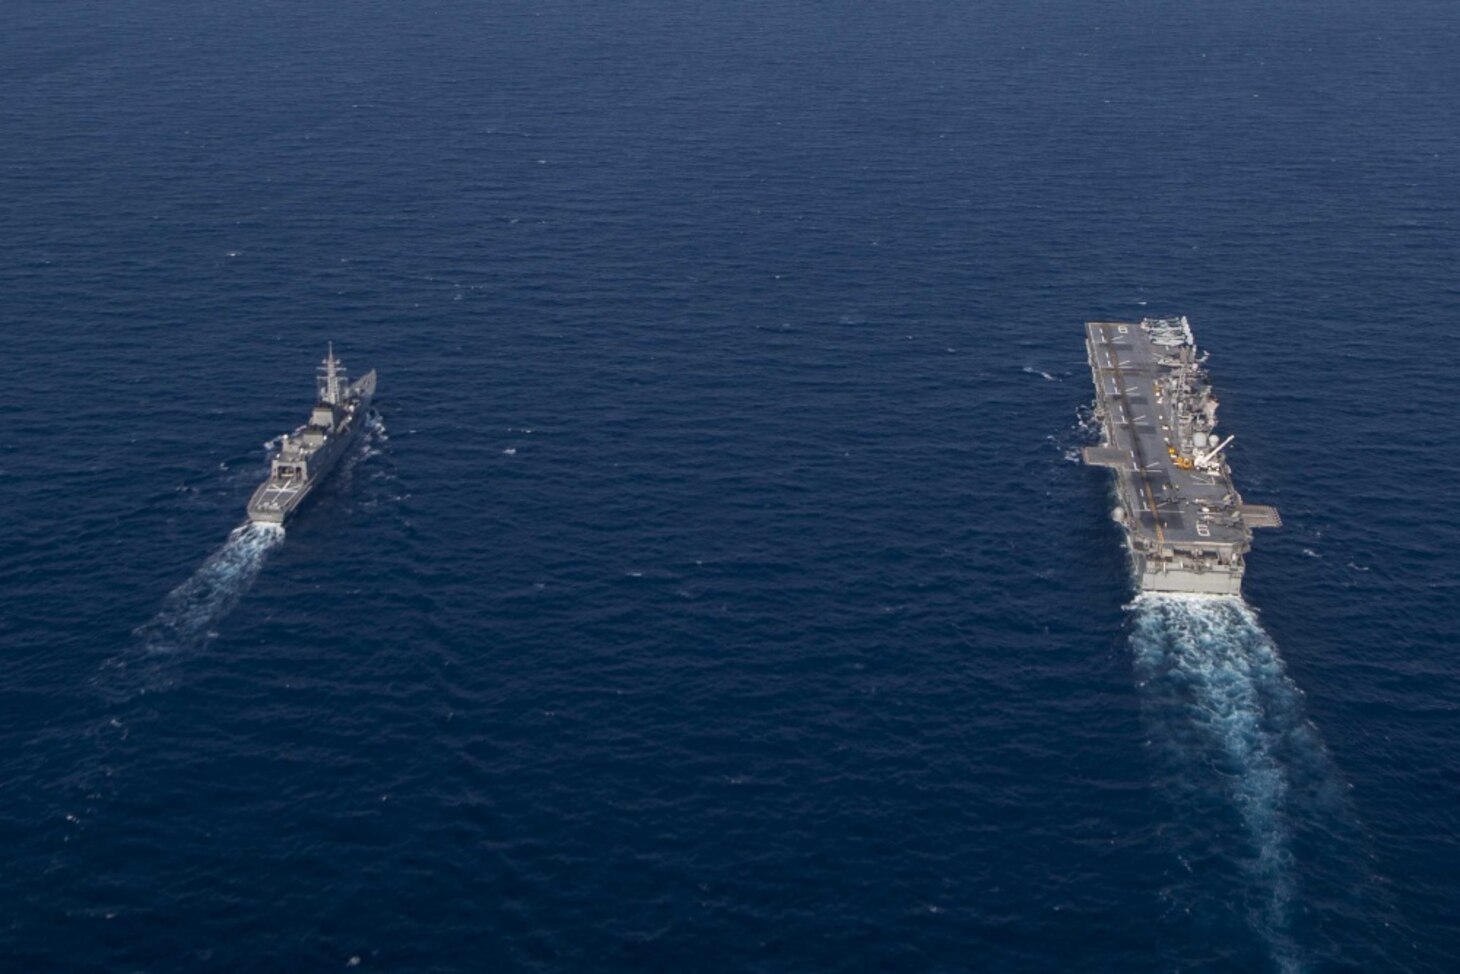 Amphibious assault ship USS America (LHA 6) and Japan Maritime Self-Defense Force destroyer JS Akebono (DD 108) sail in formation in the East China Sea. America, flagship of the America Expeditionary Strike Group, 31st Marine Expeditionary Unit team is operating in the 7th Fleet area of operations to enhance interoperability with allies and partners and serve as a ready response force to defend peace and stability in the Indo-Pacific region